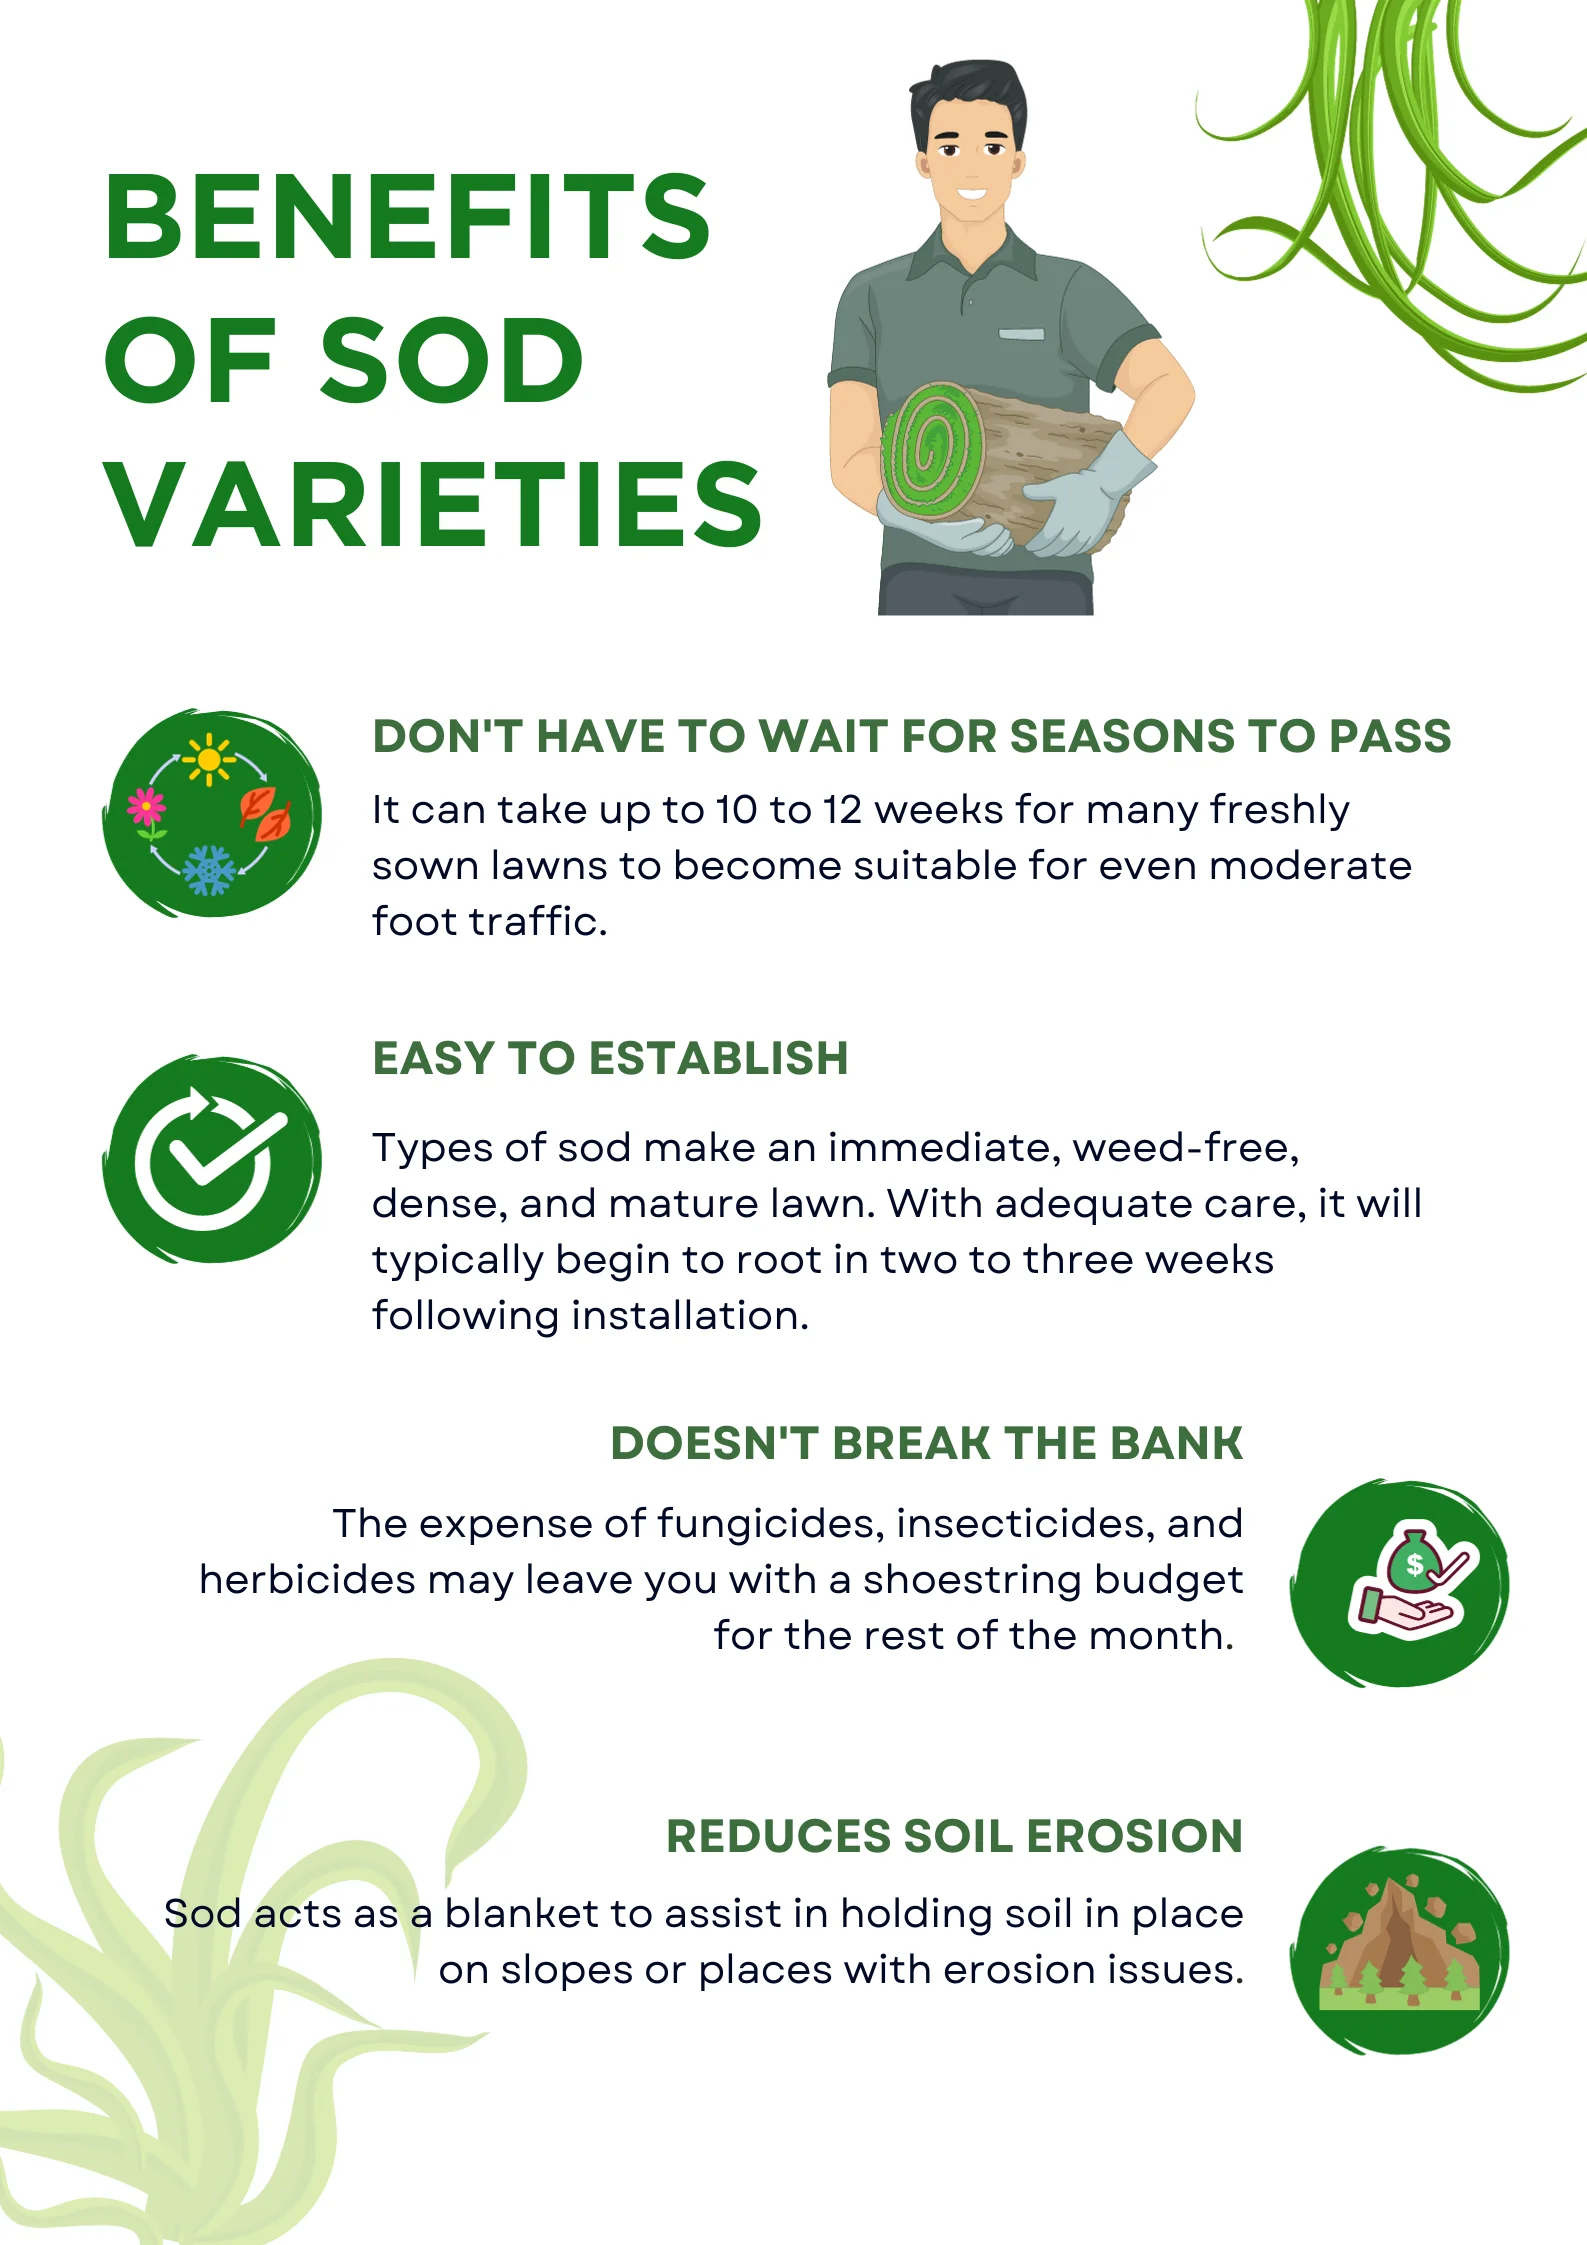 An infographic on the benefits of the types of sod